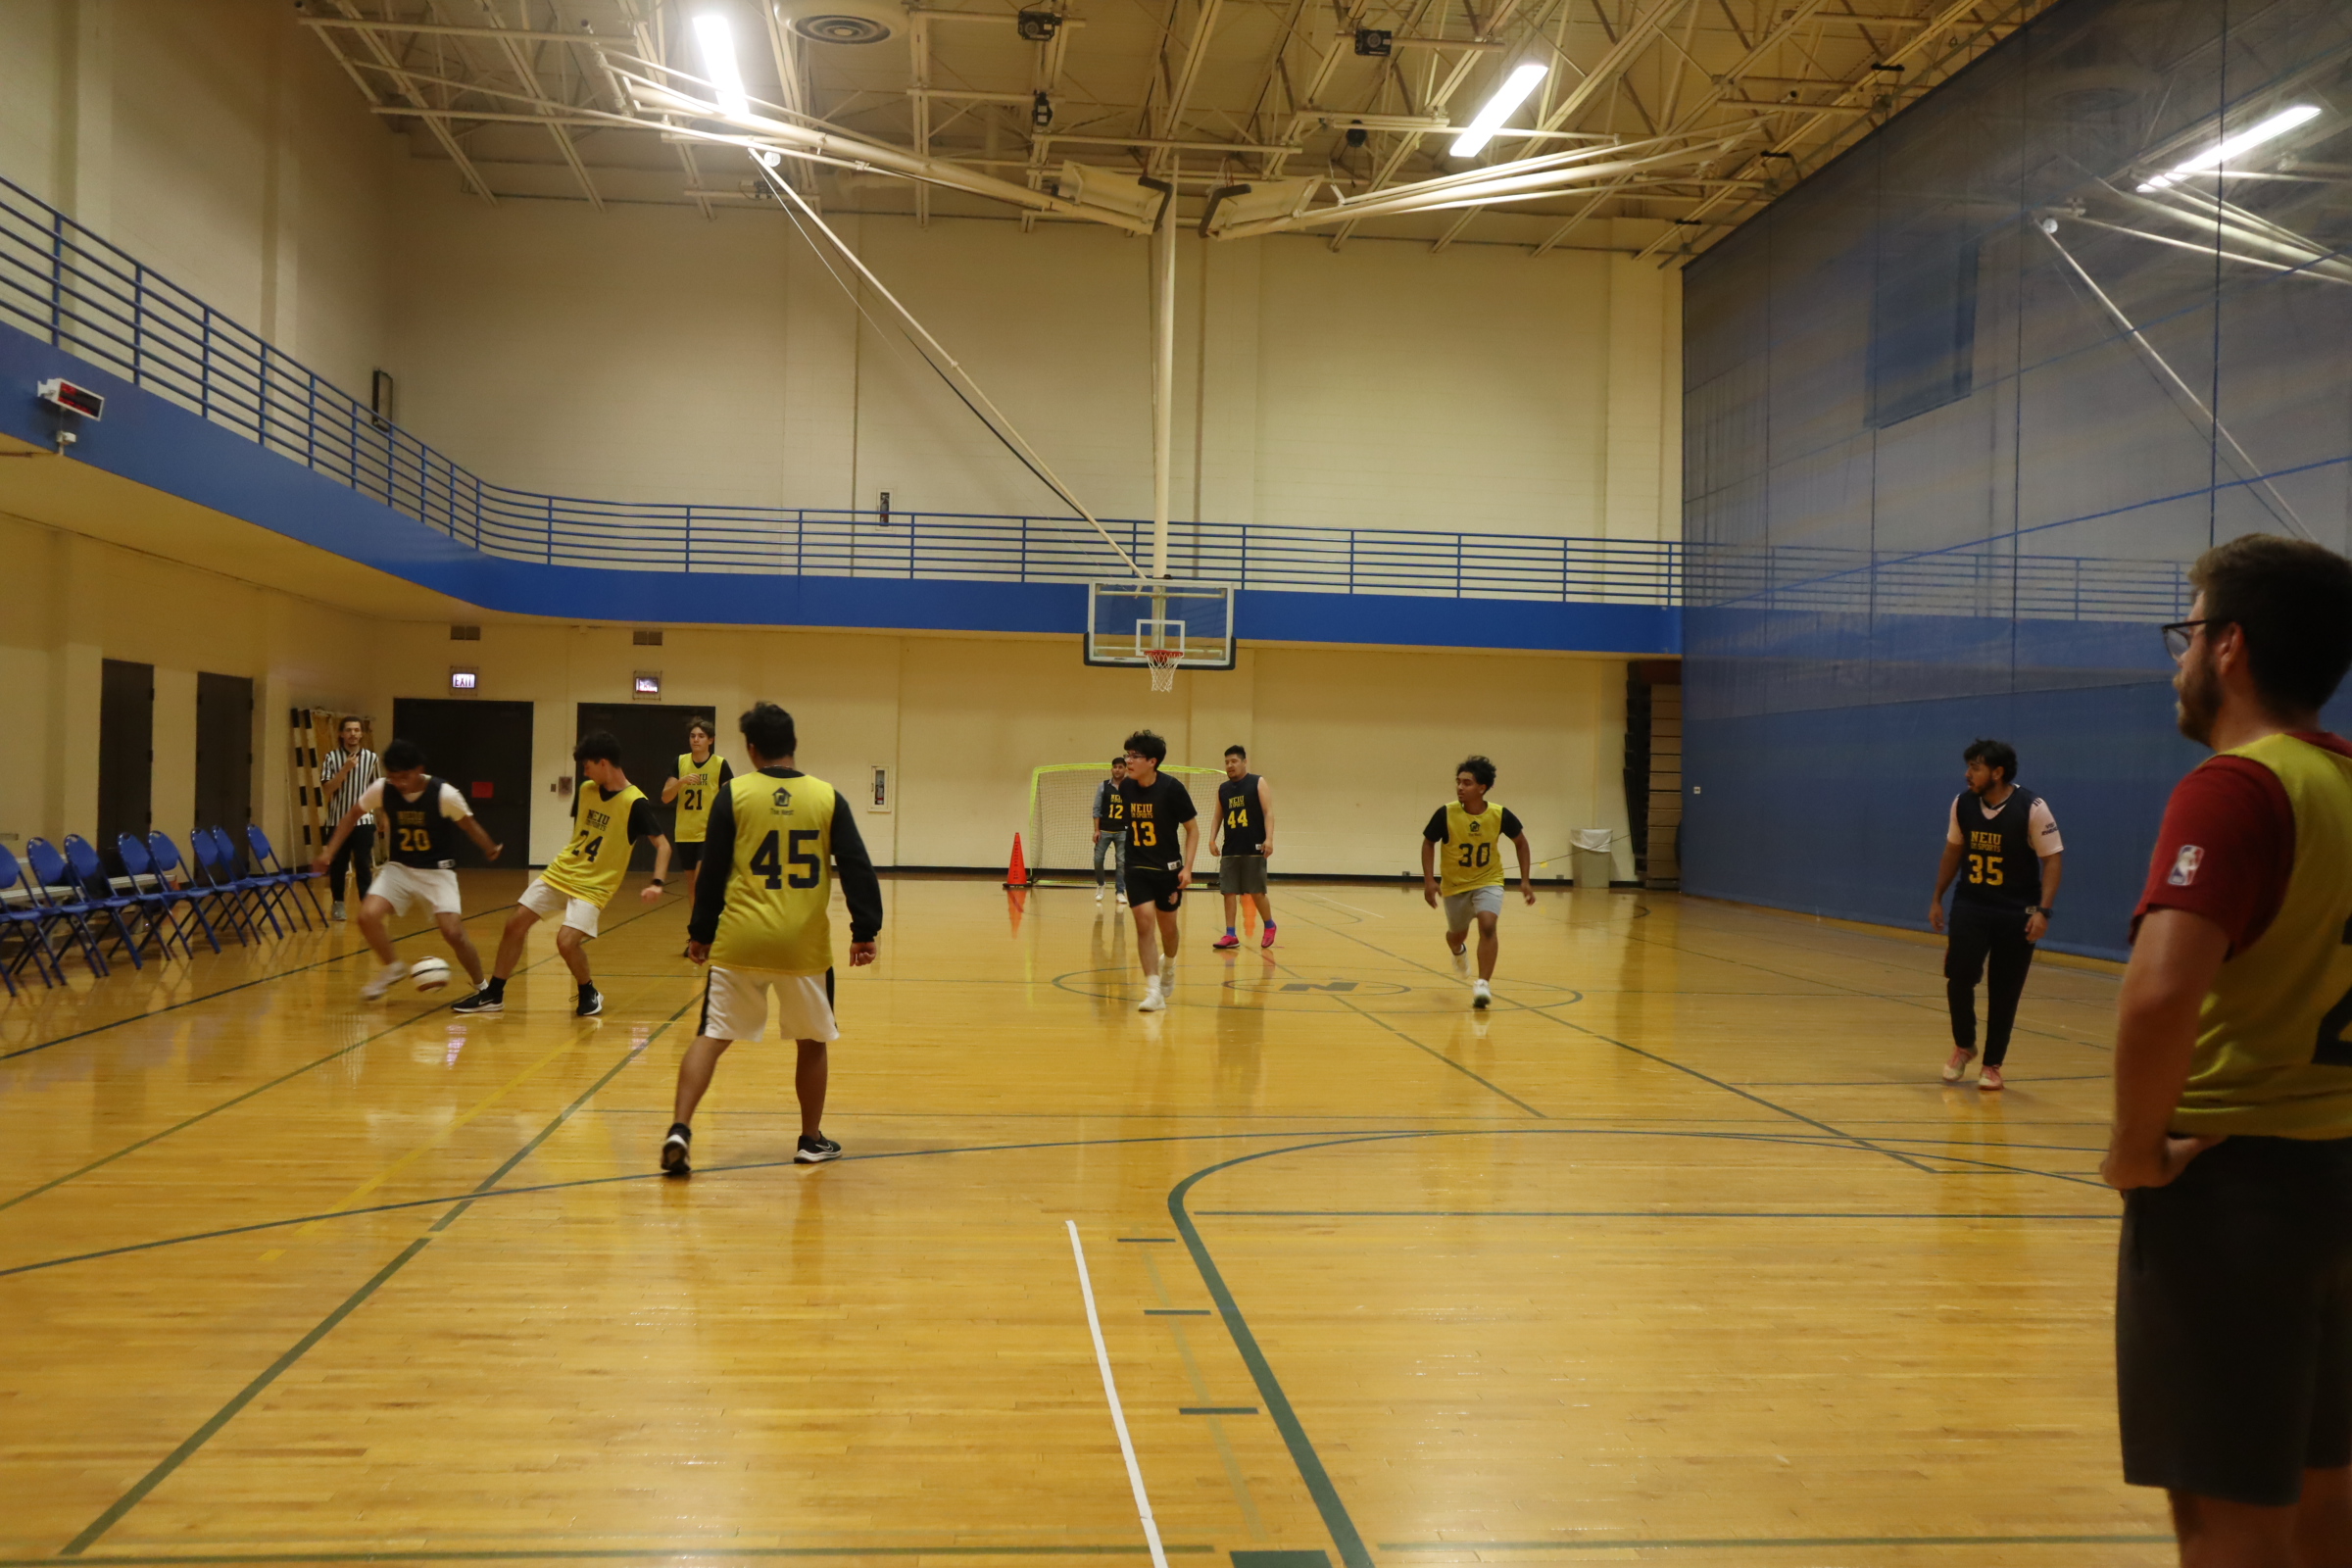 Students participating in a Basketball game